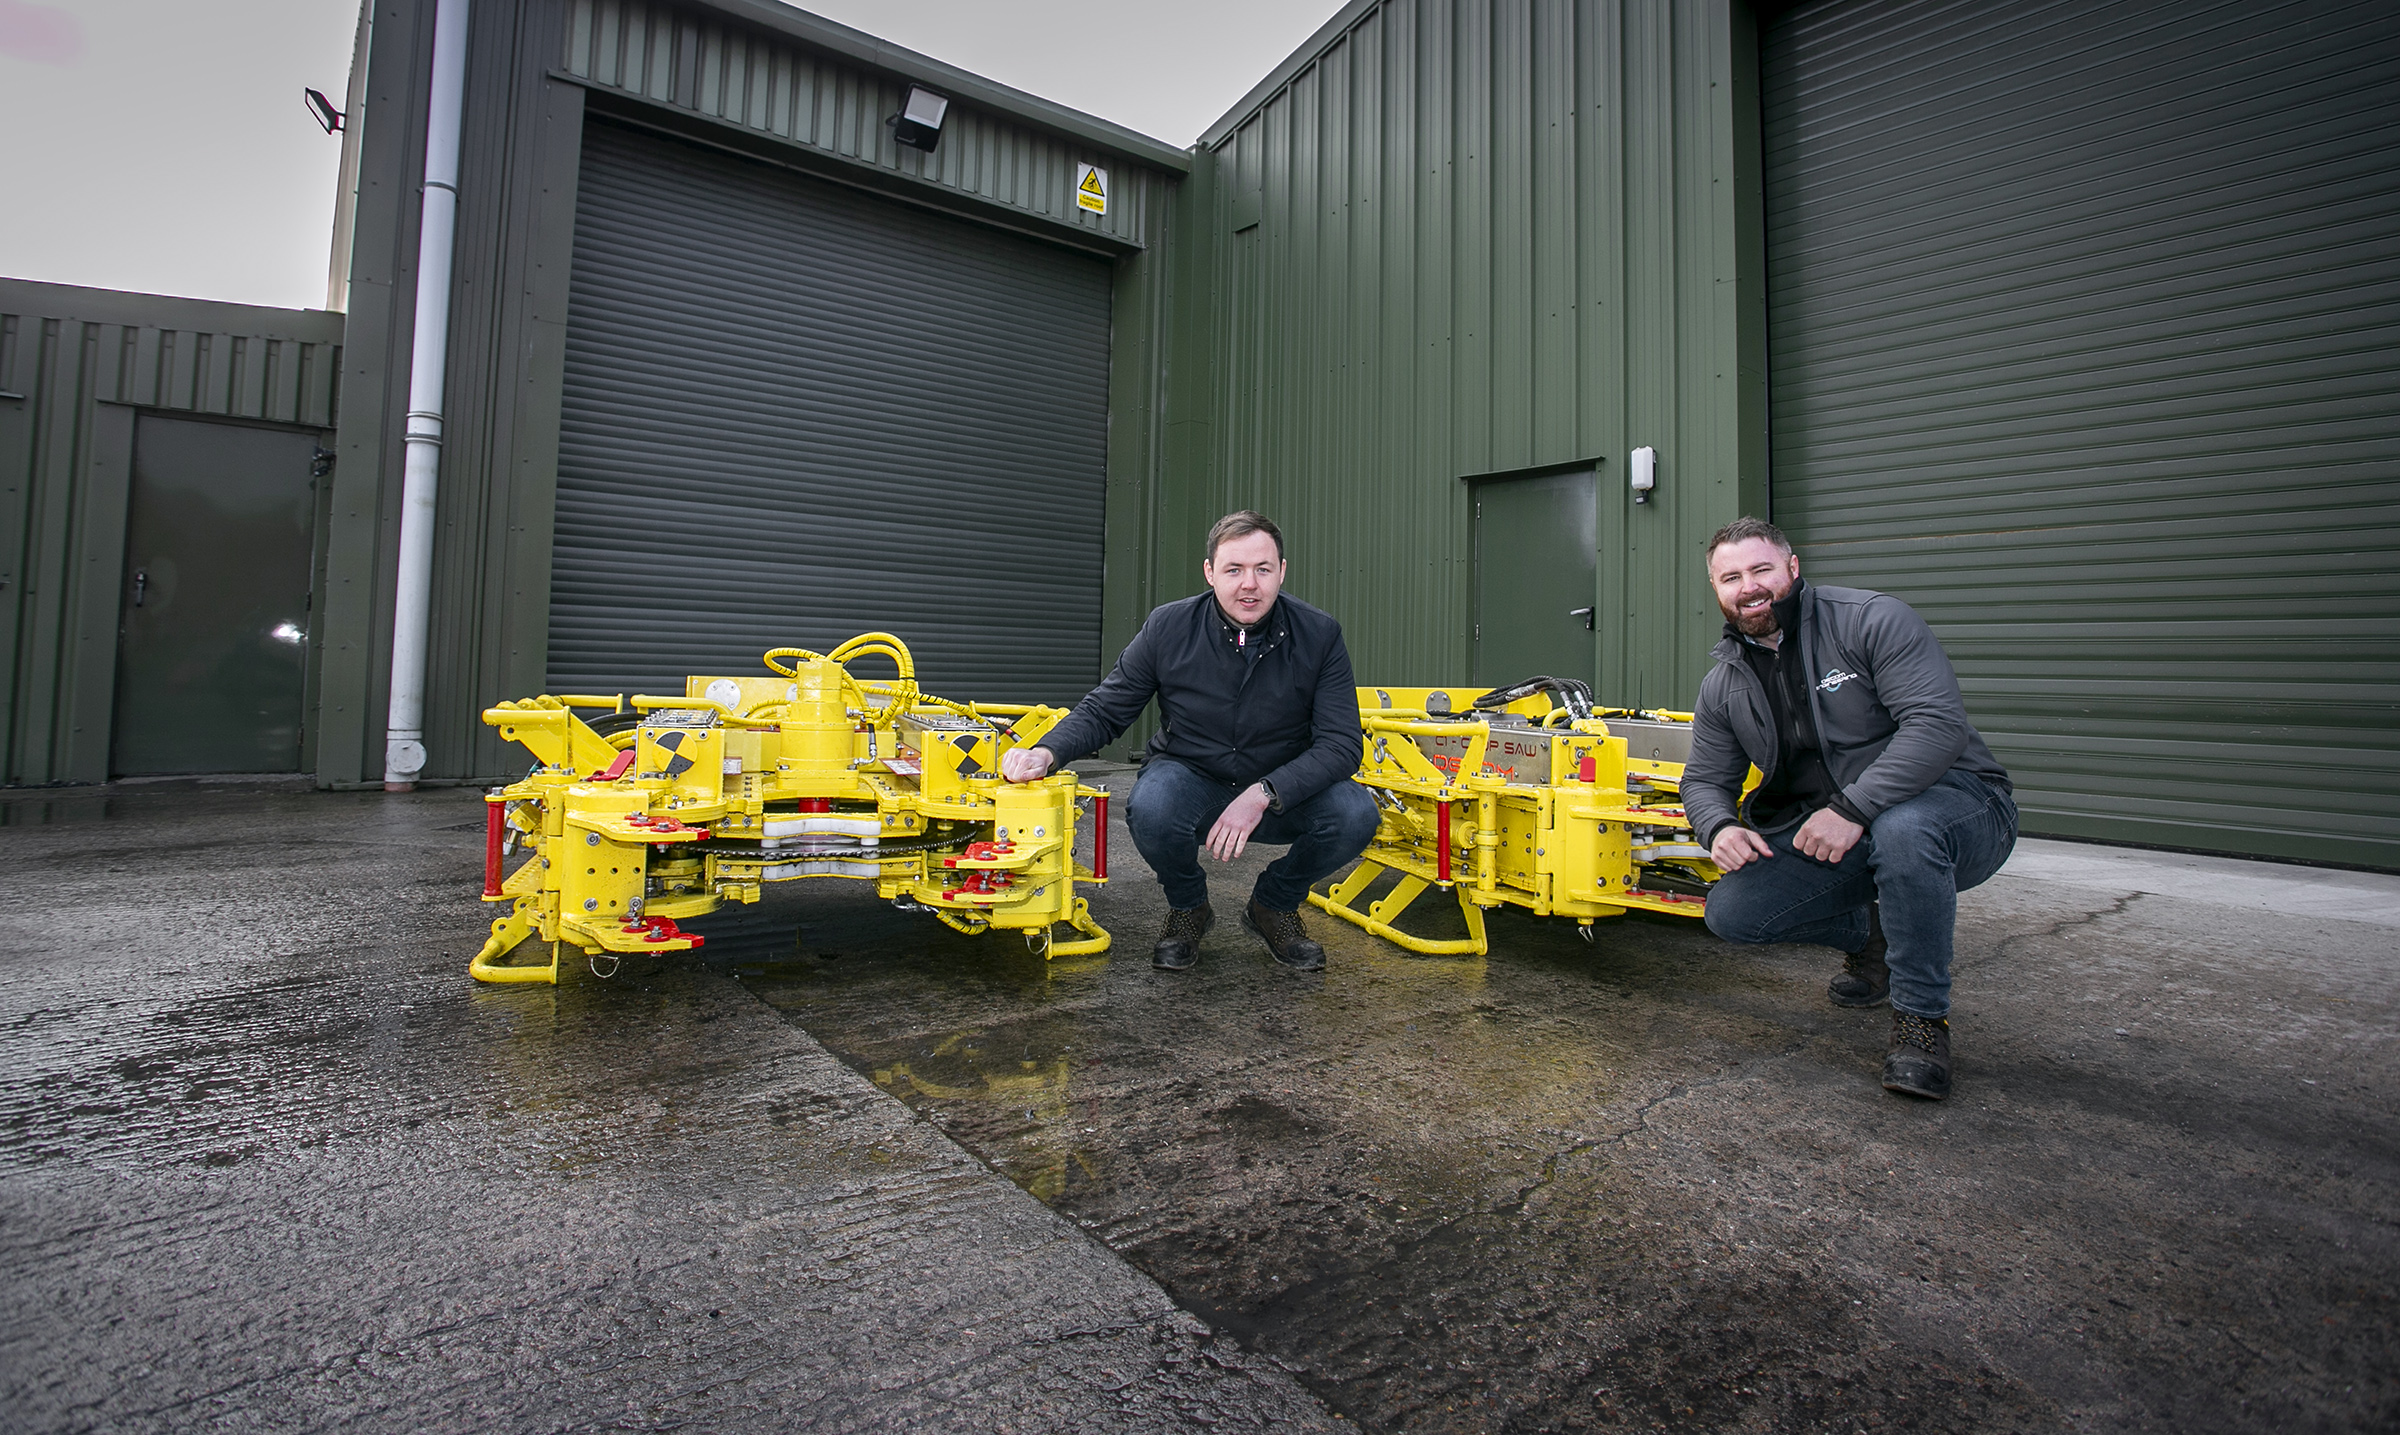 Northern Irish pipeline decom firm targets more oil & gas clients with new facility